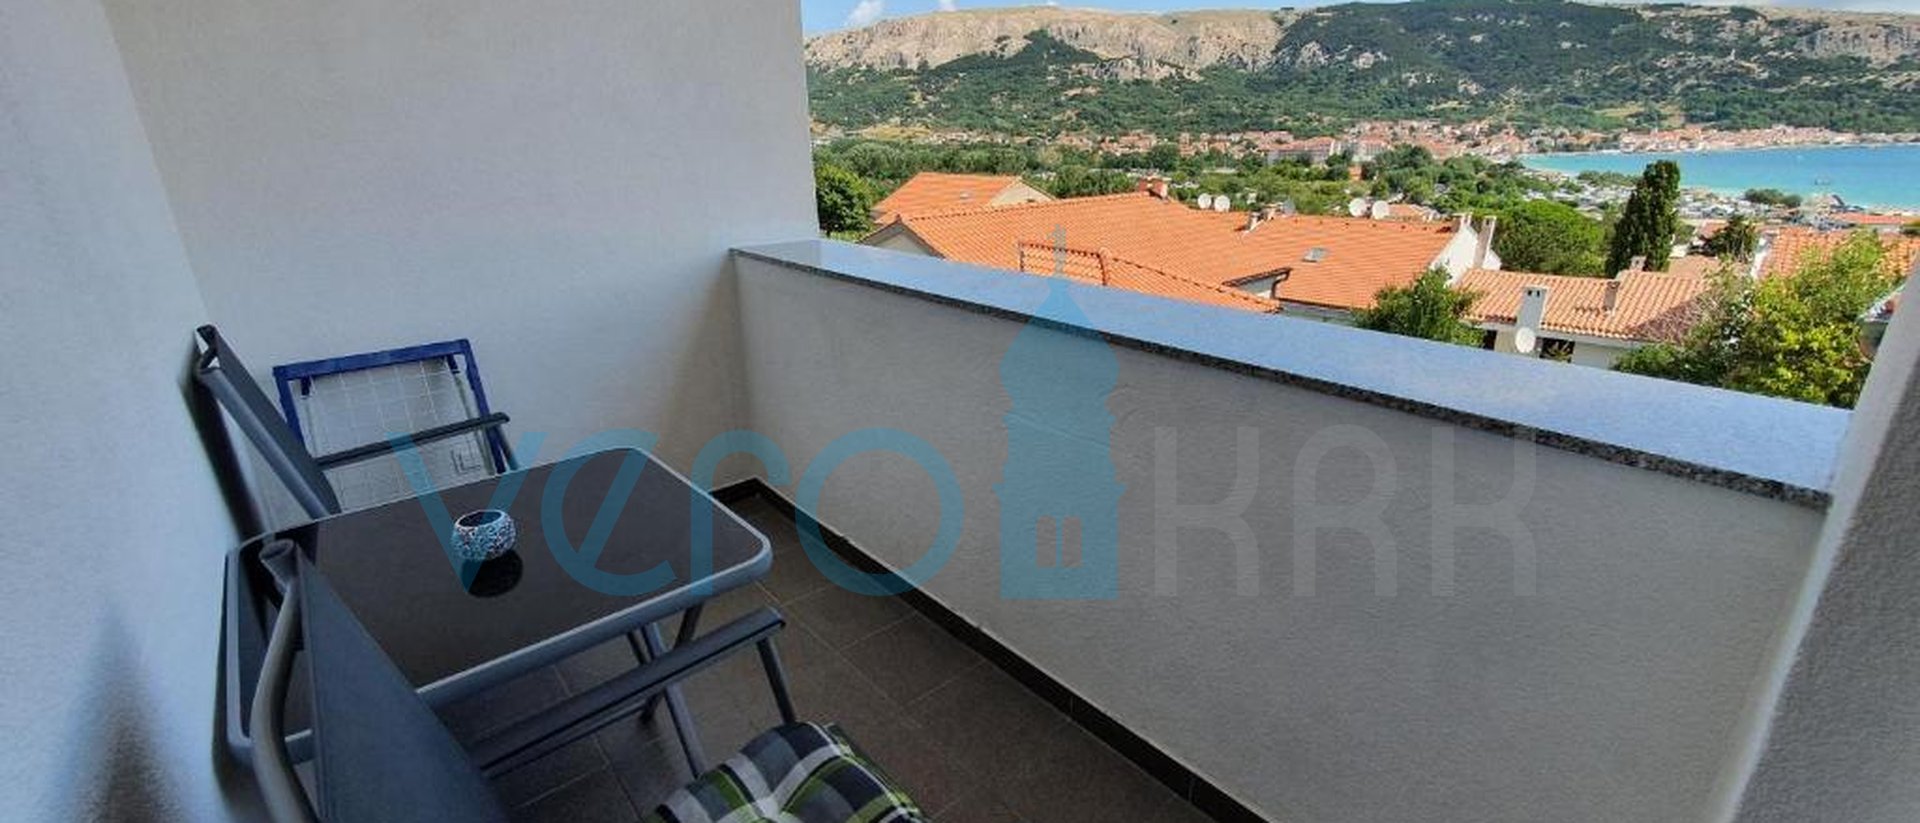 Island of Krk, Baška, apartment 57m2, second floor, sea view, for sale